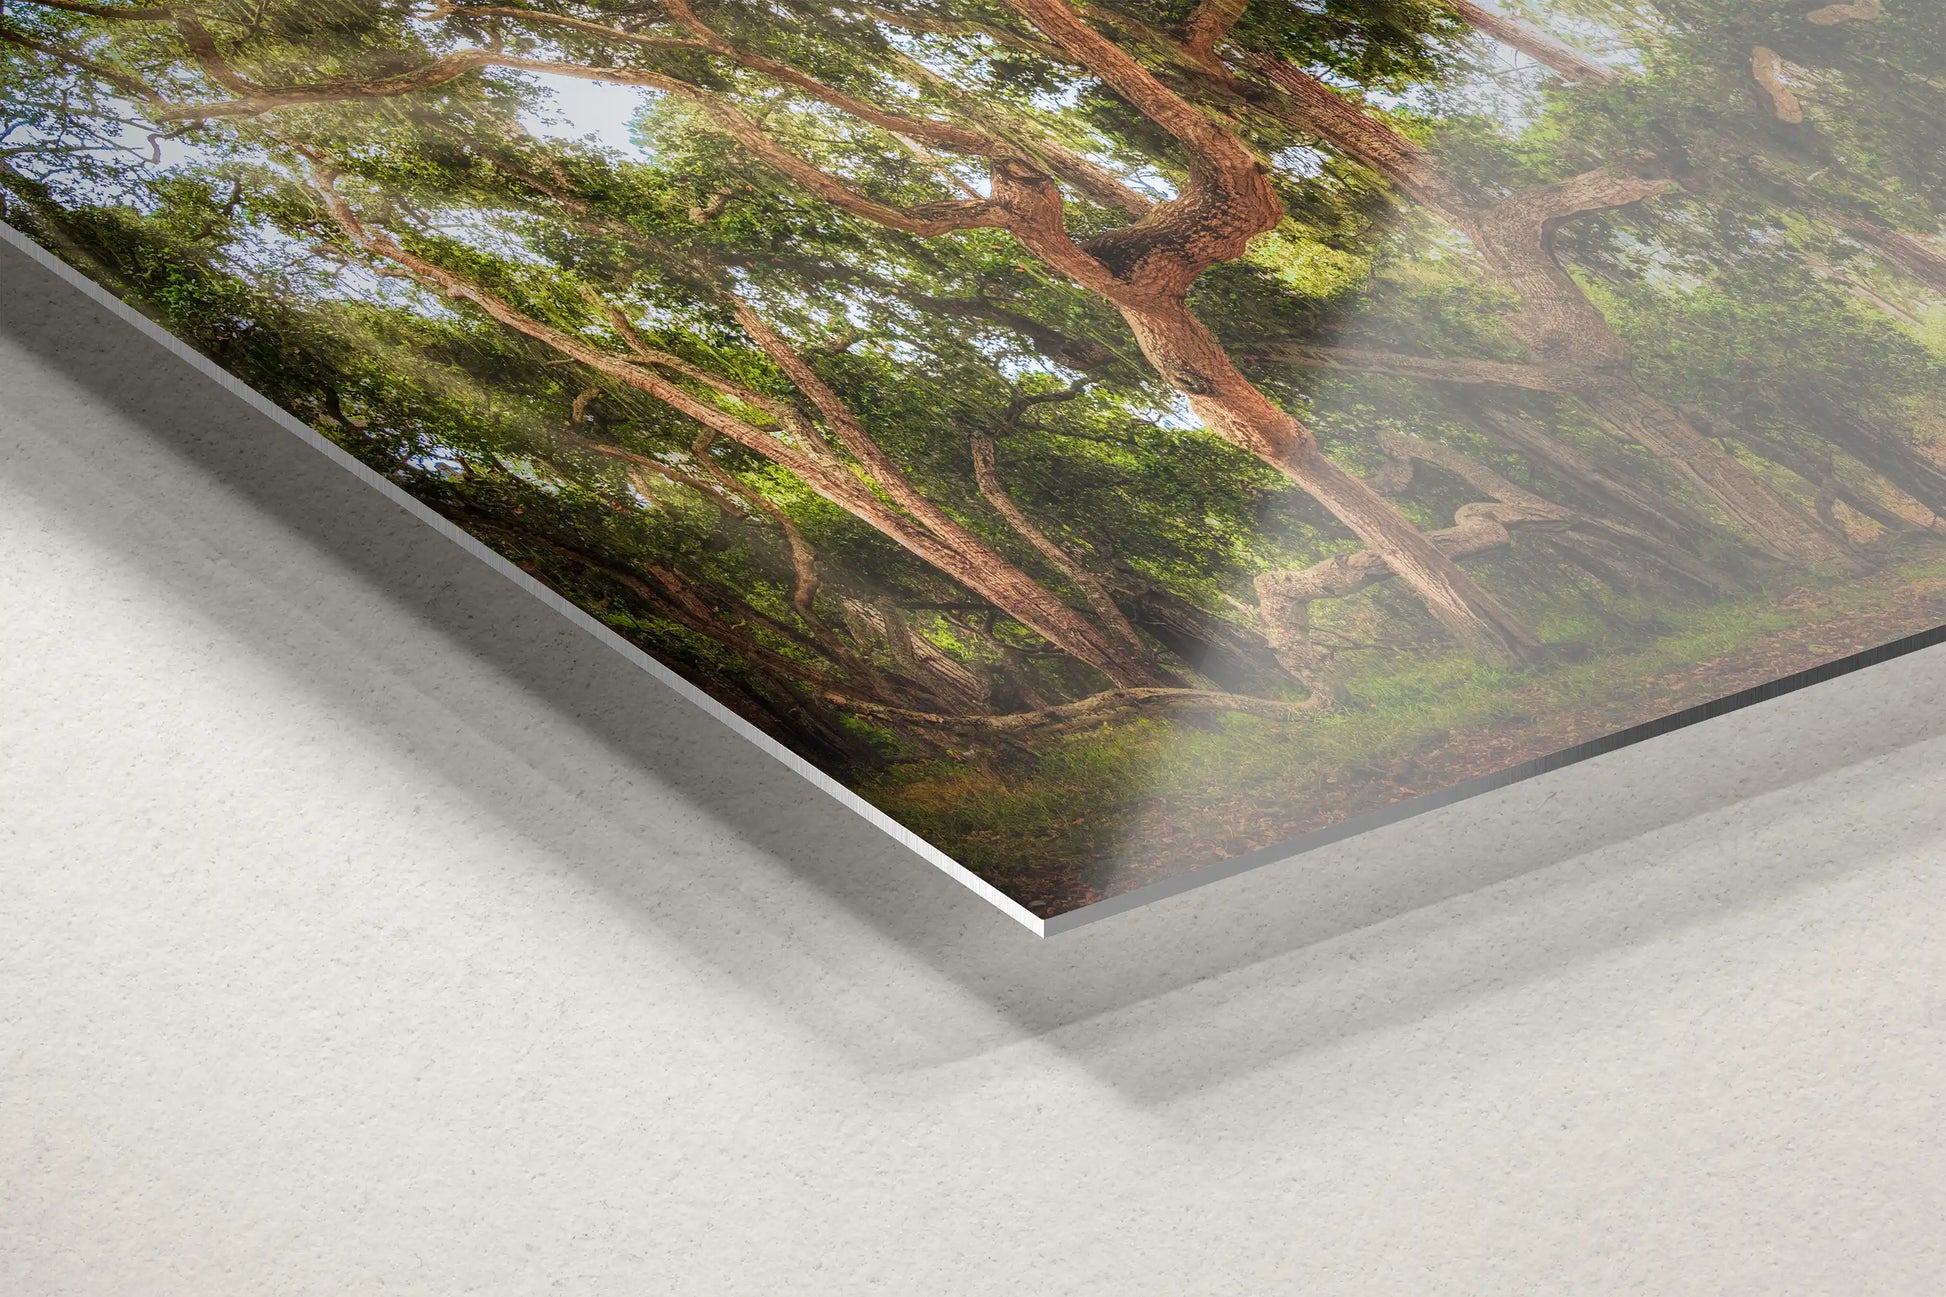 Close-up of a high-quality aluminum metal decor piece depicting the Coast Live Oak Tree, focusing on the detailed textures and colors.